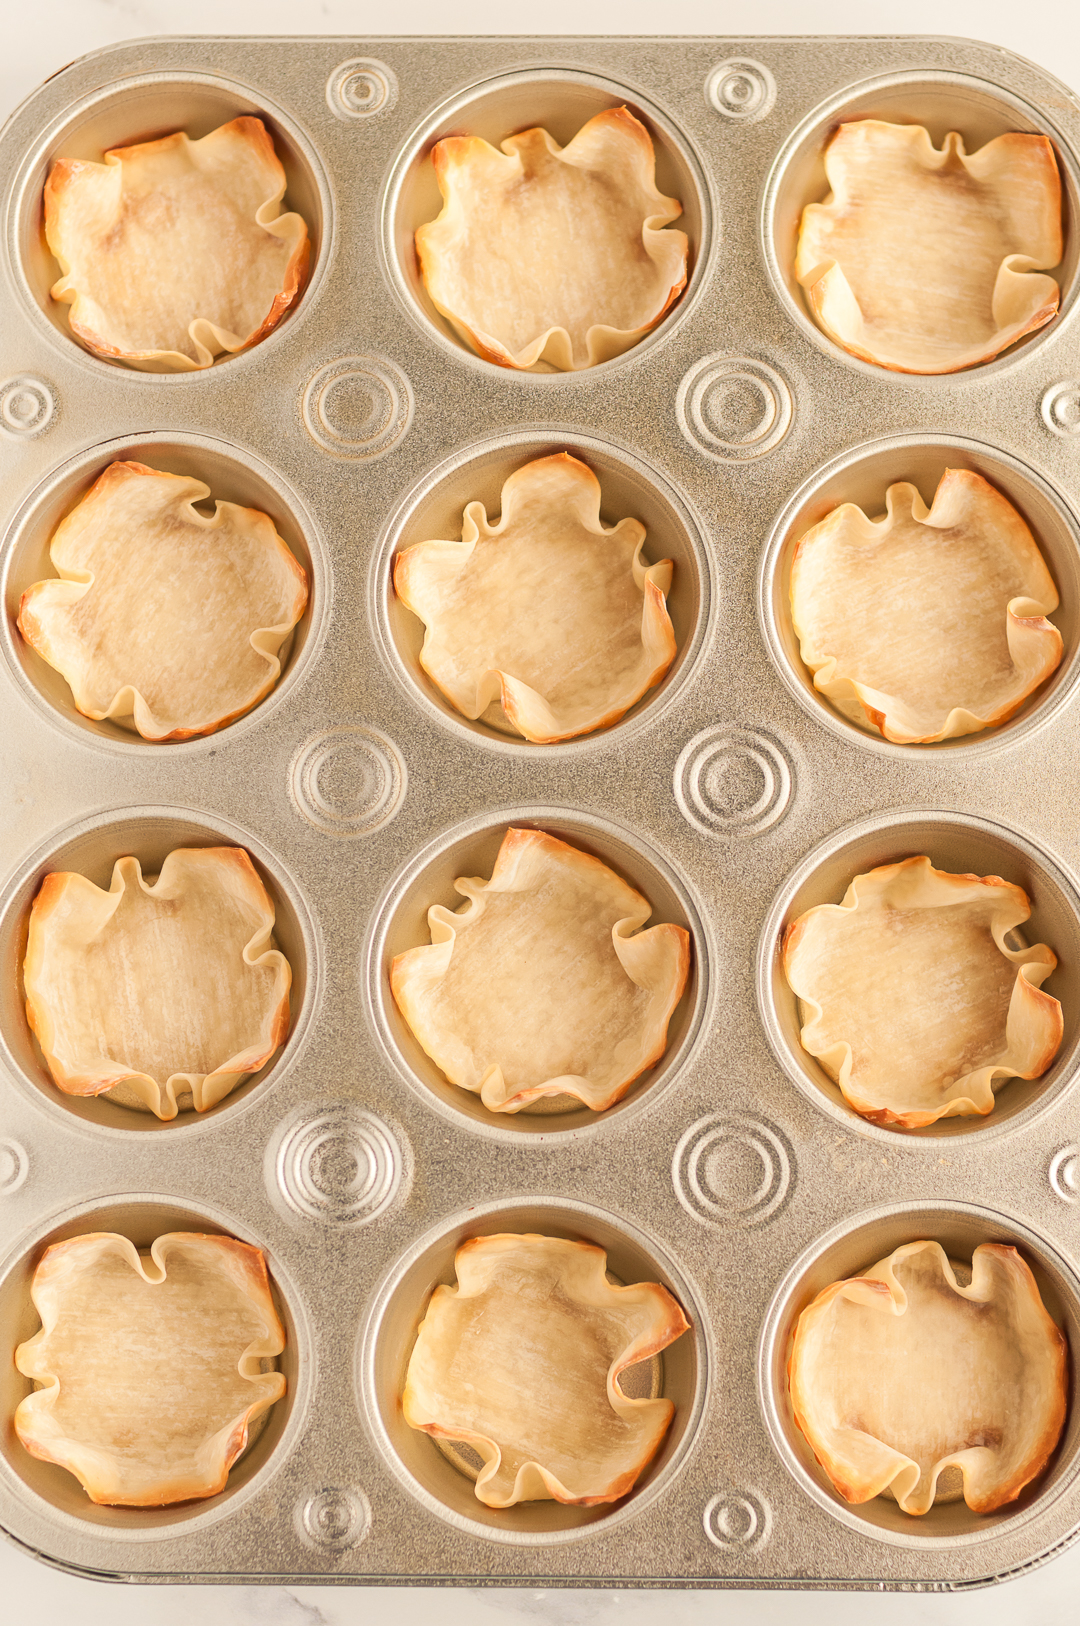 Wonton Wrappers Are Baked with a Muffin Tin